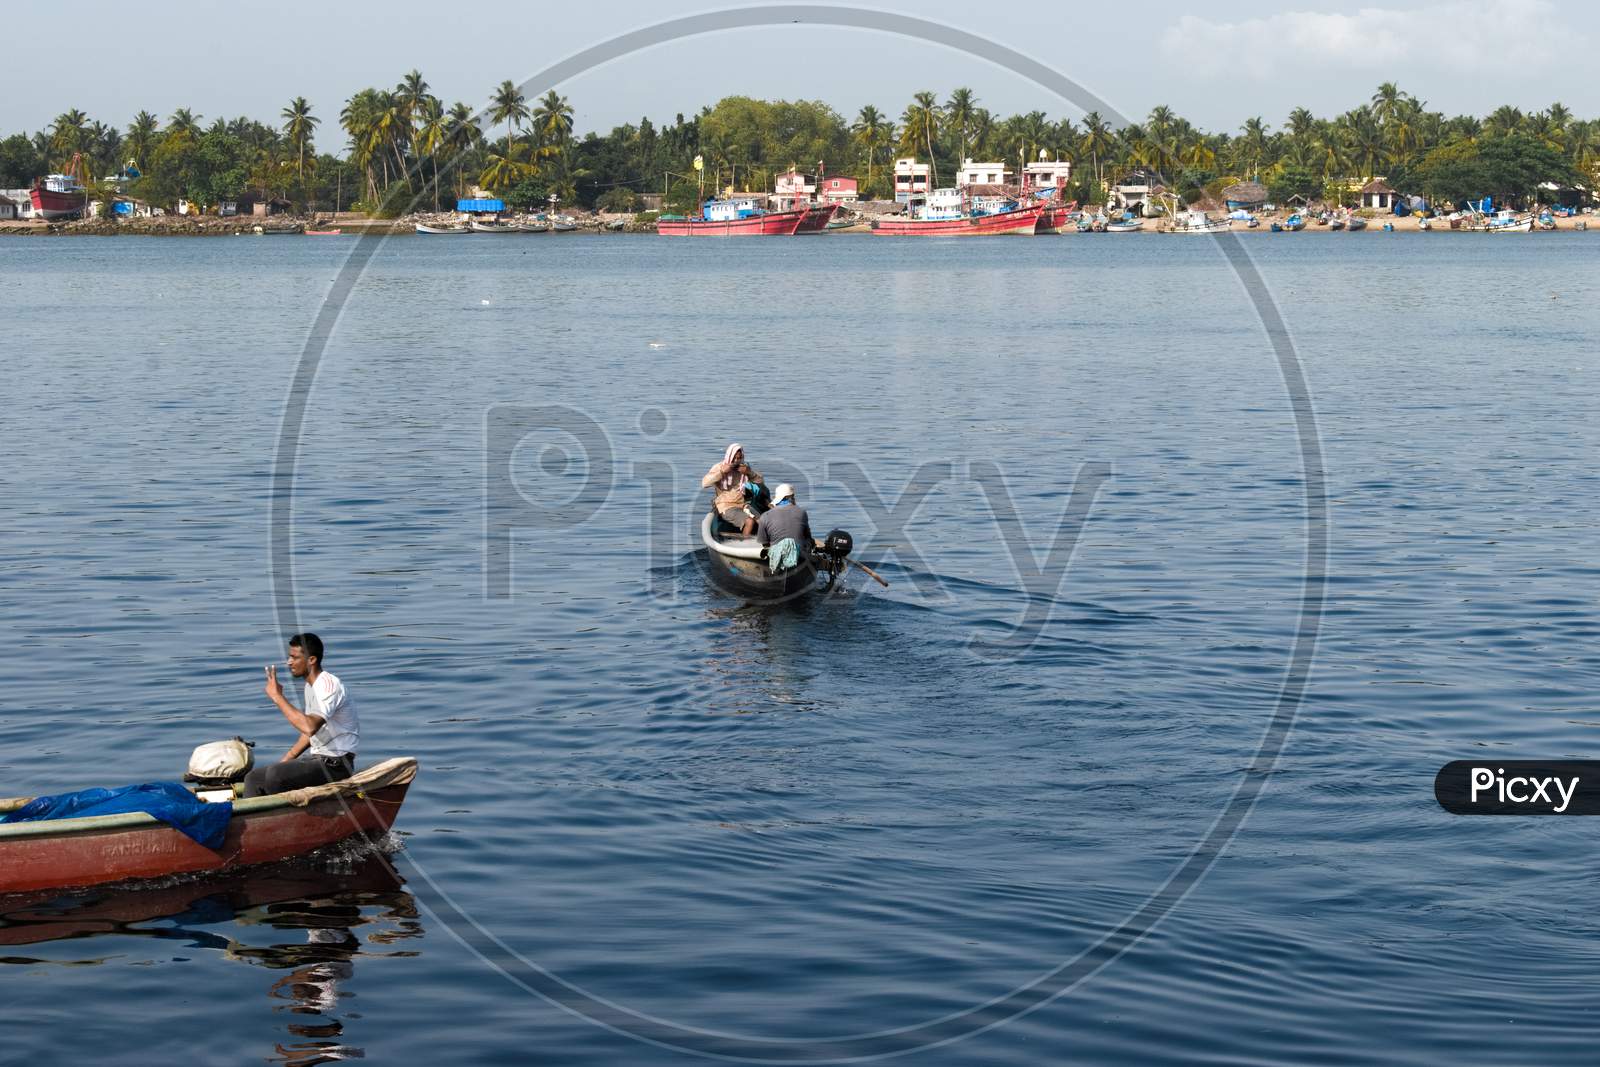 "Mangalore, Karnataka, India - April 2Nd 2021 : Indian Fishermen With Their Boat On The River Ready For Fishing"